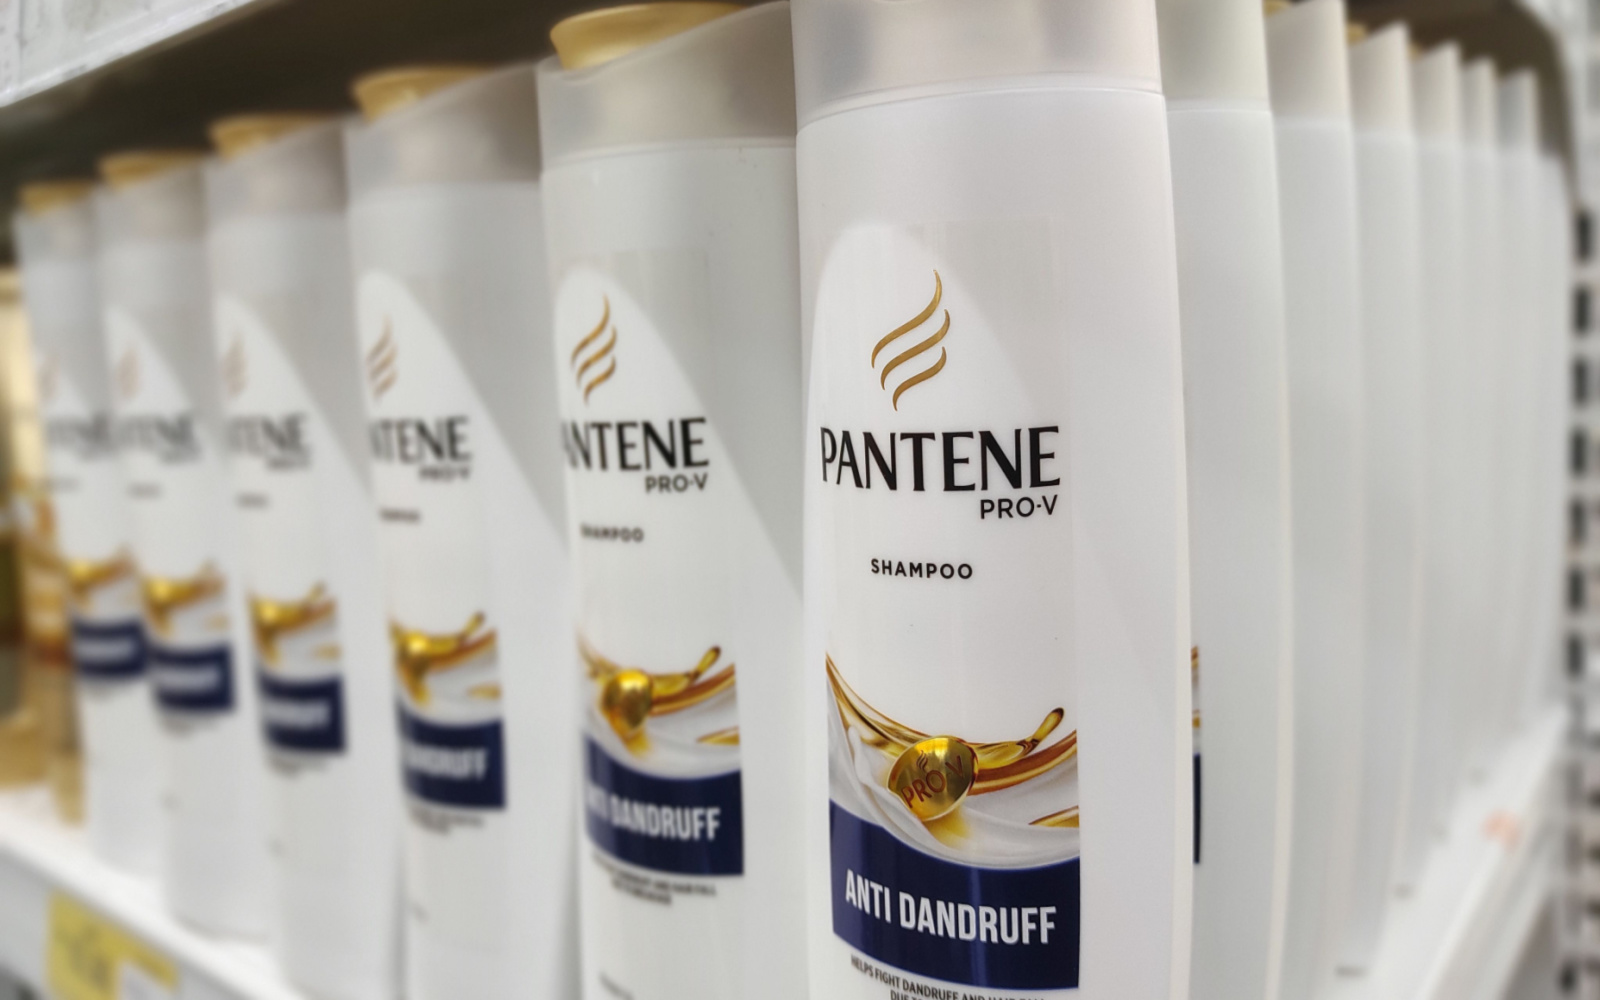 Does Pantene Cause Hair Loss? | Not for Most People